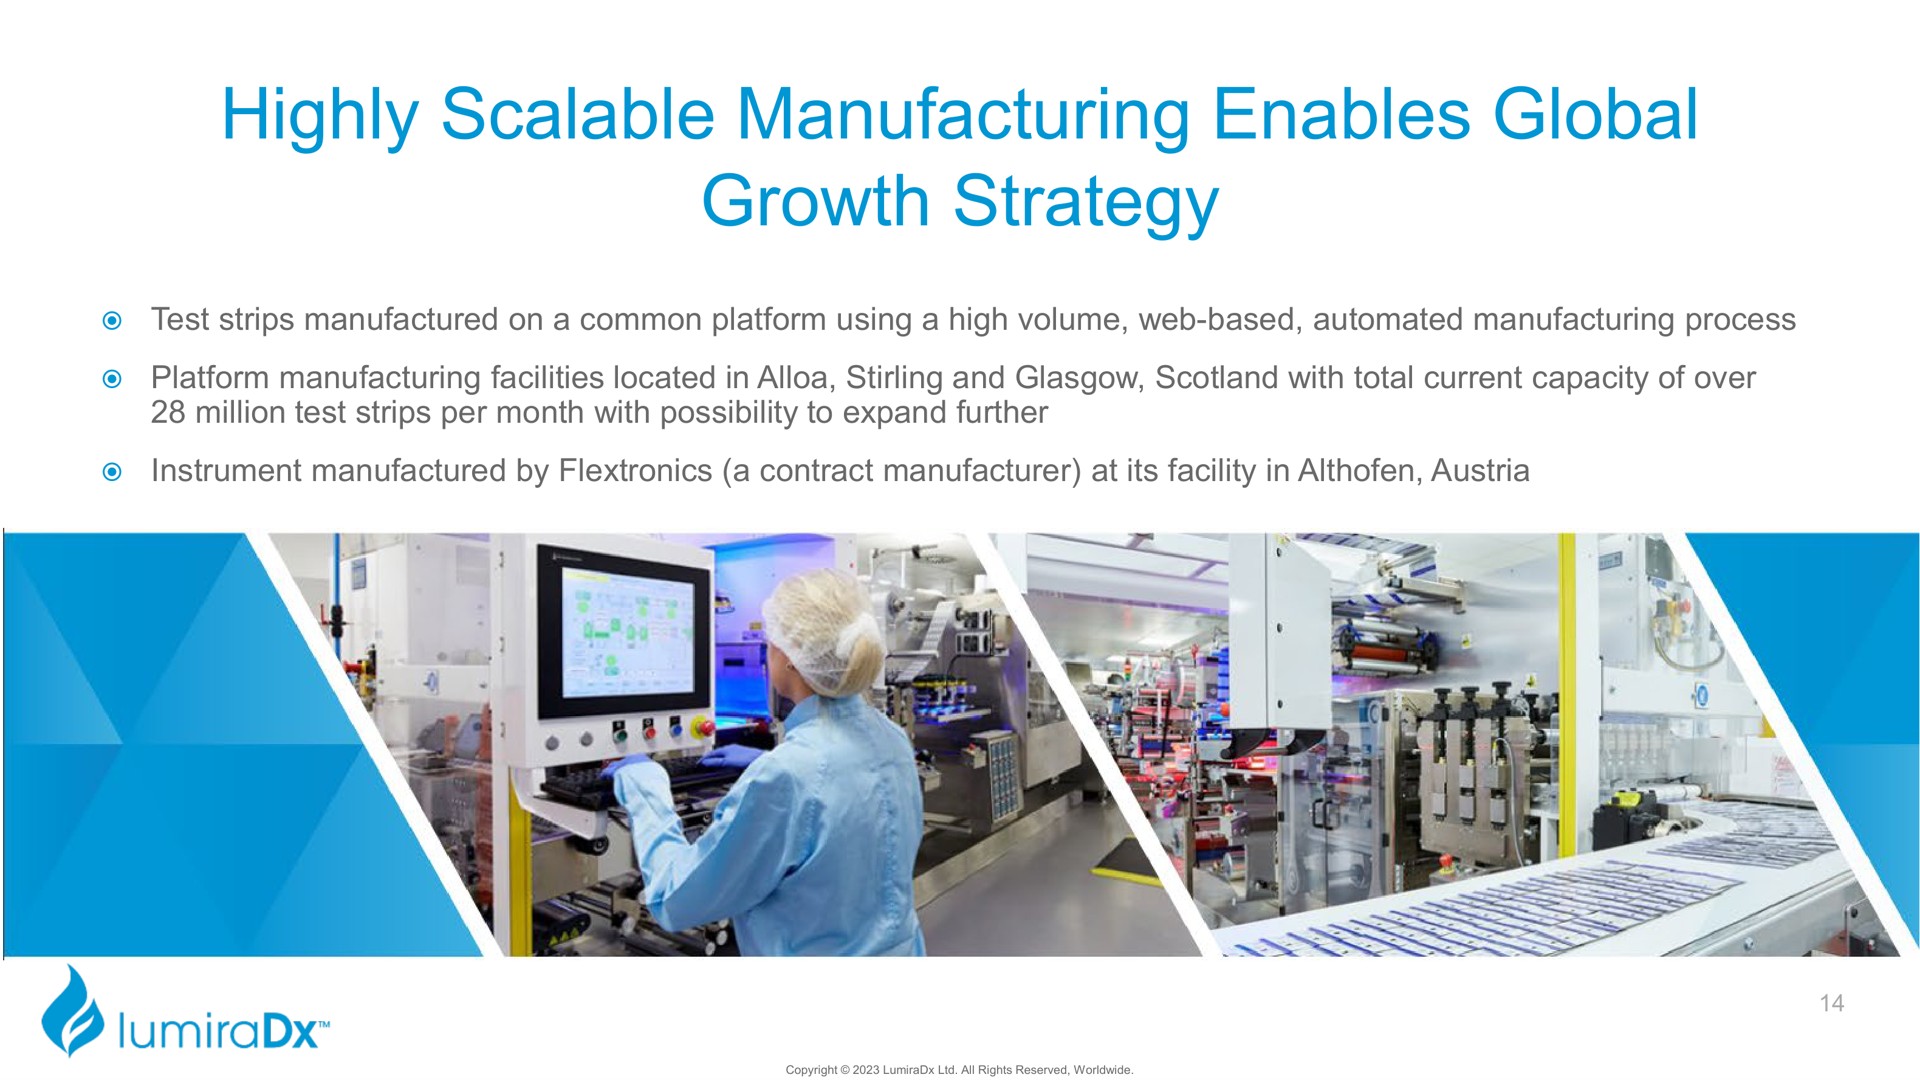 highly scalable manufacturing enables global growth strategy | LumiraDx